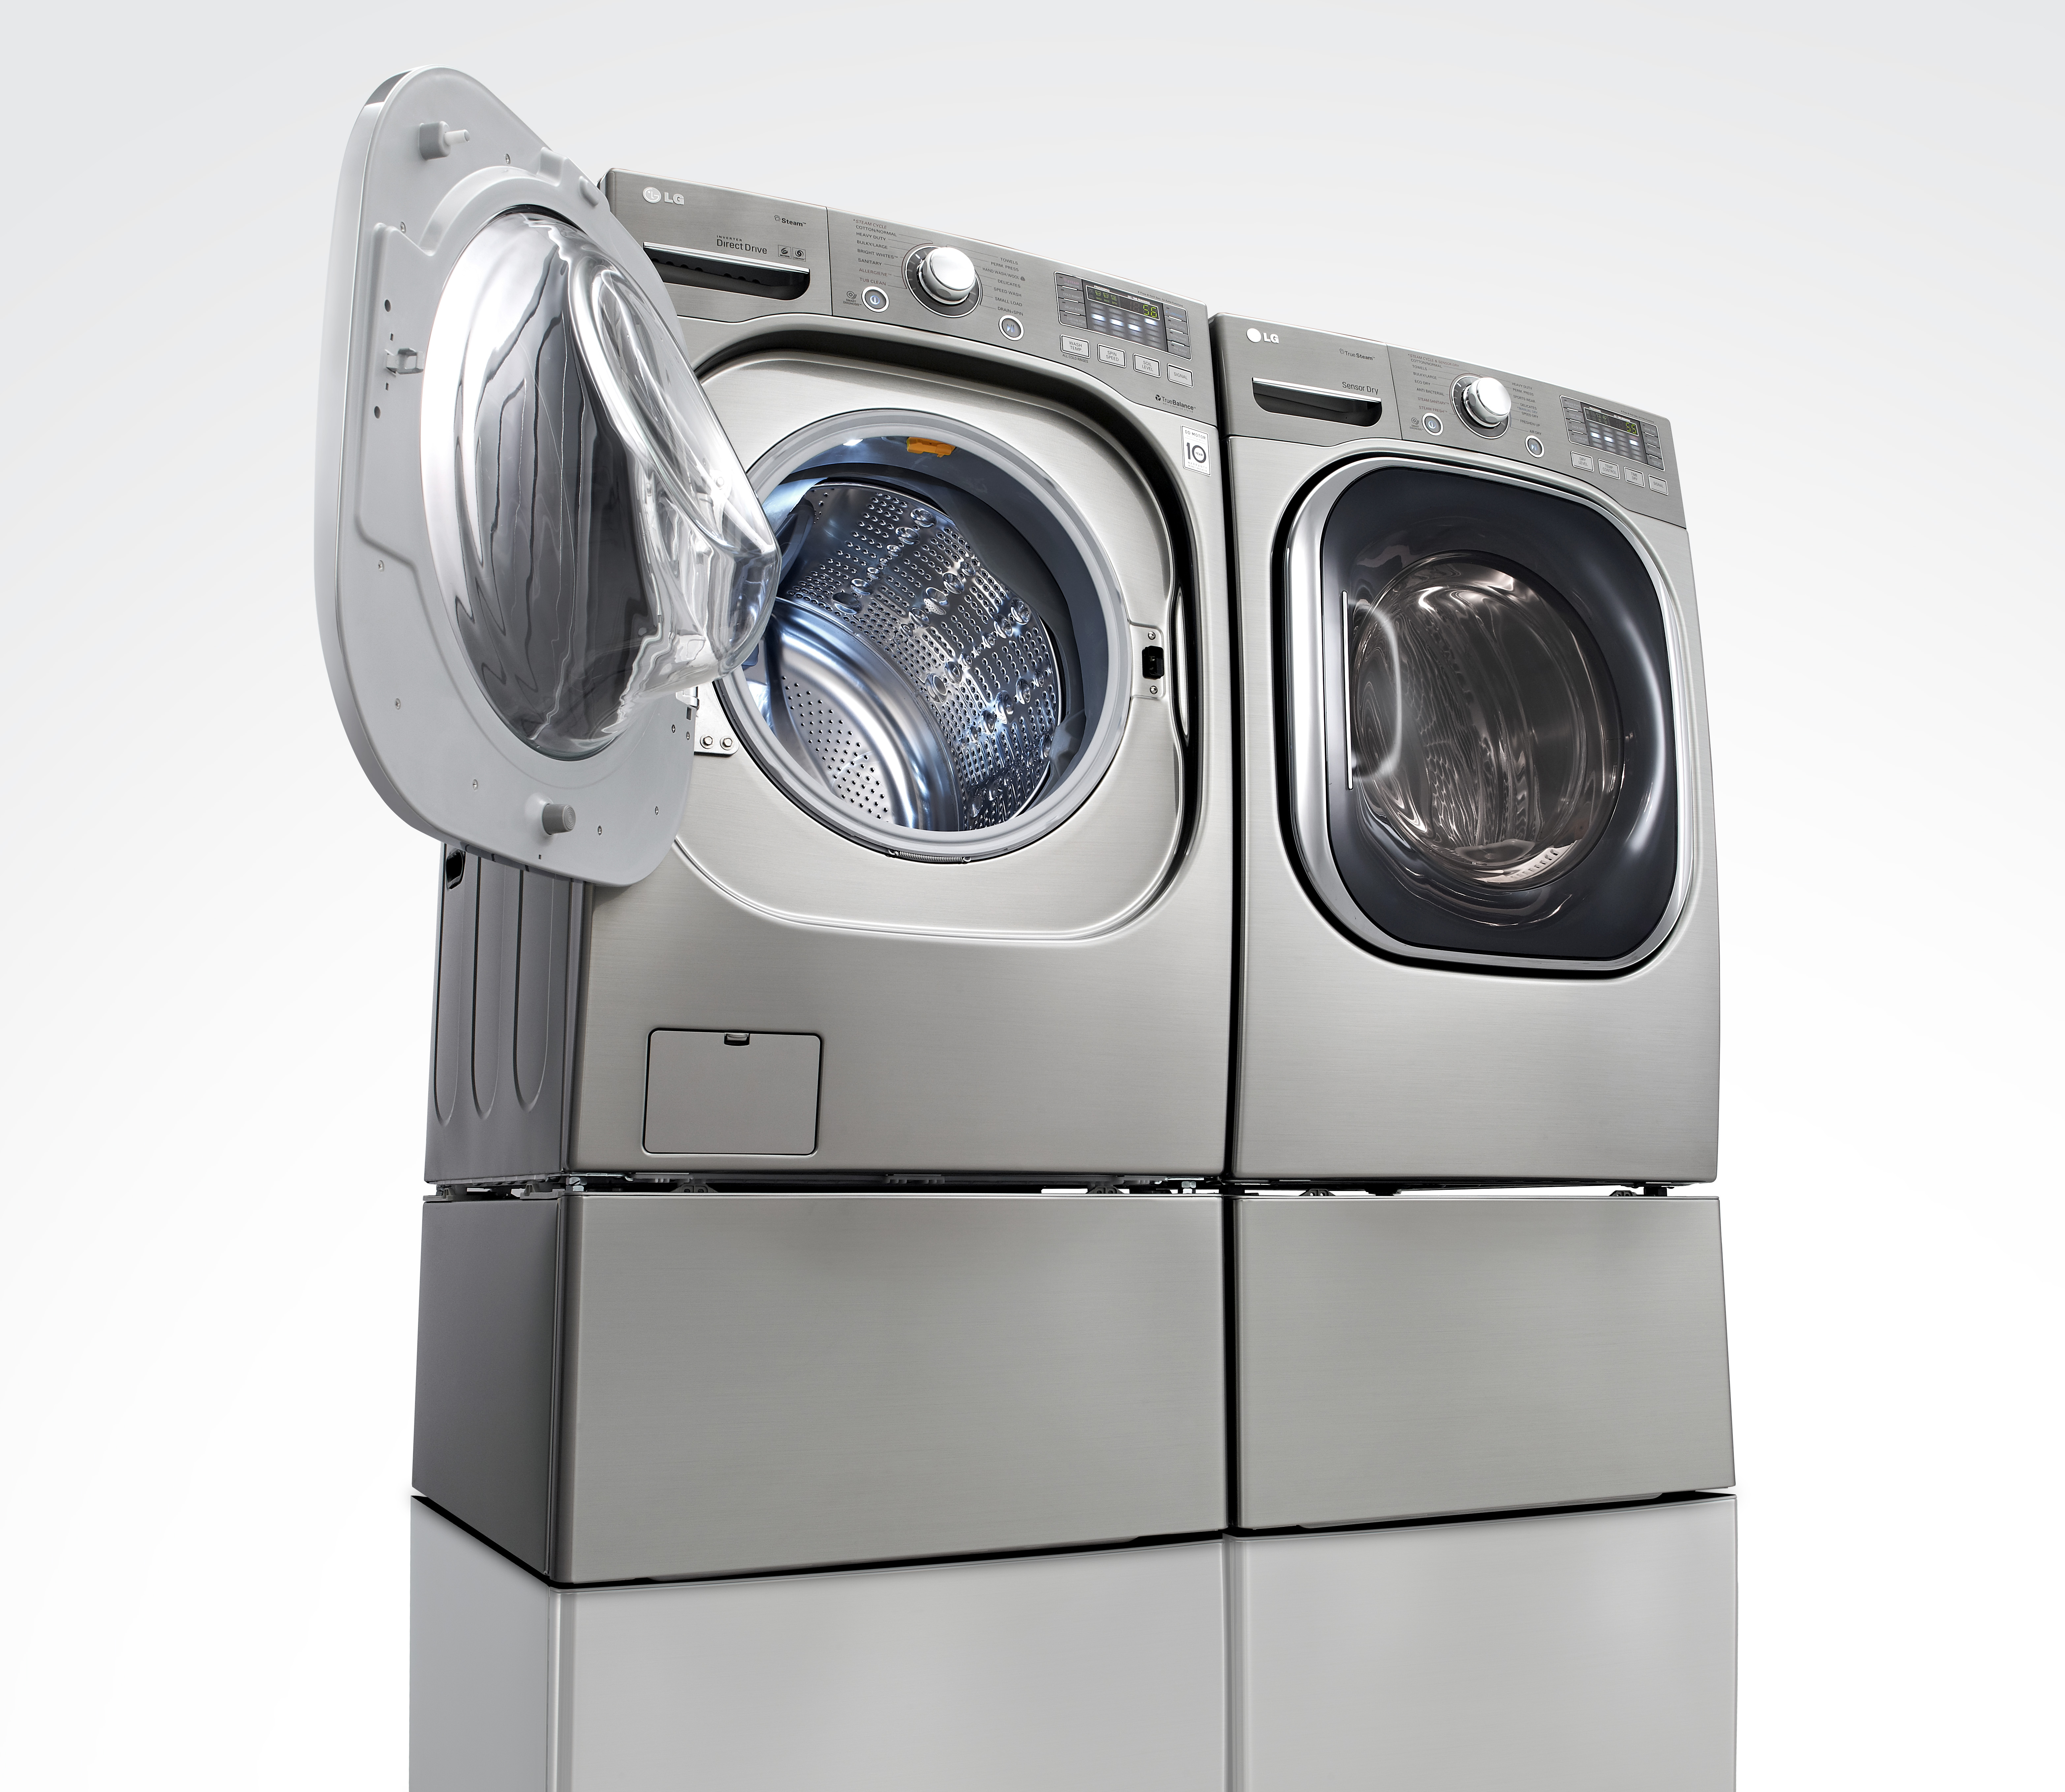 LG SHOWCASES MEGA CAPACITY FRONT AND TOP LOADER WASHERDRYERS WITH